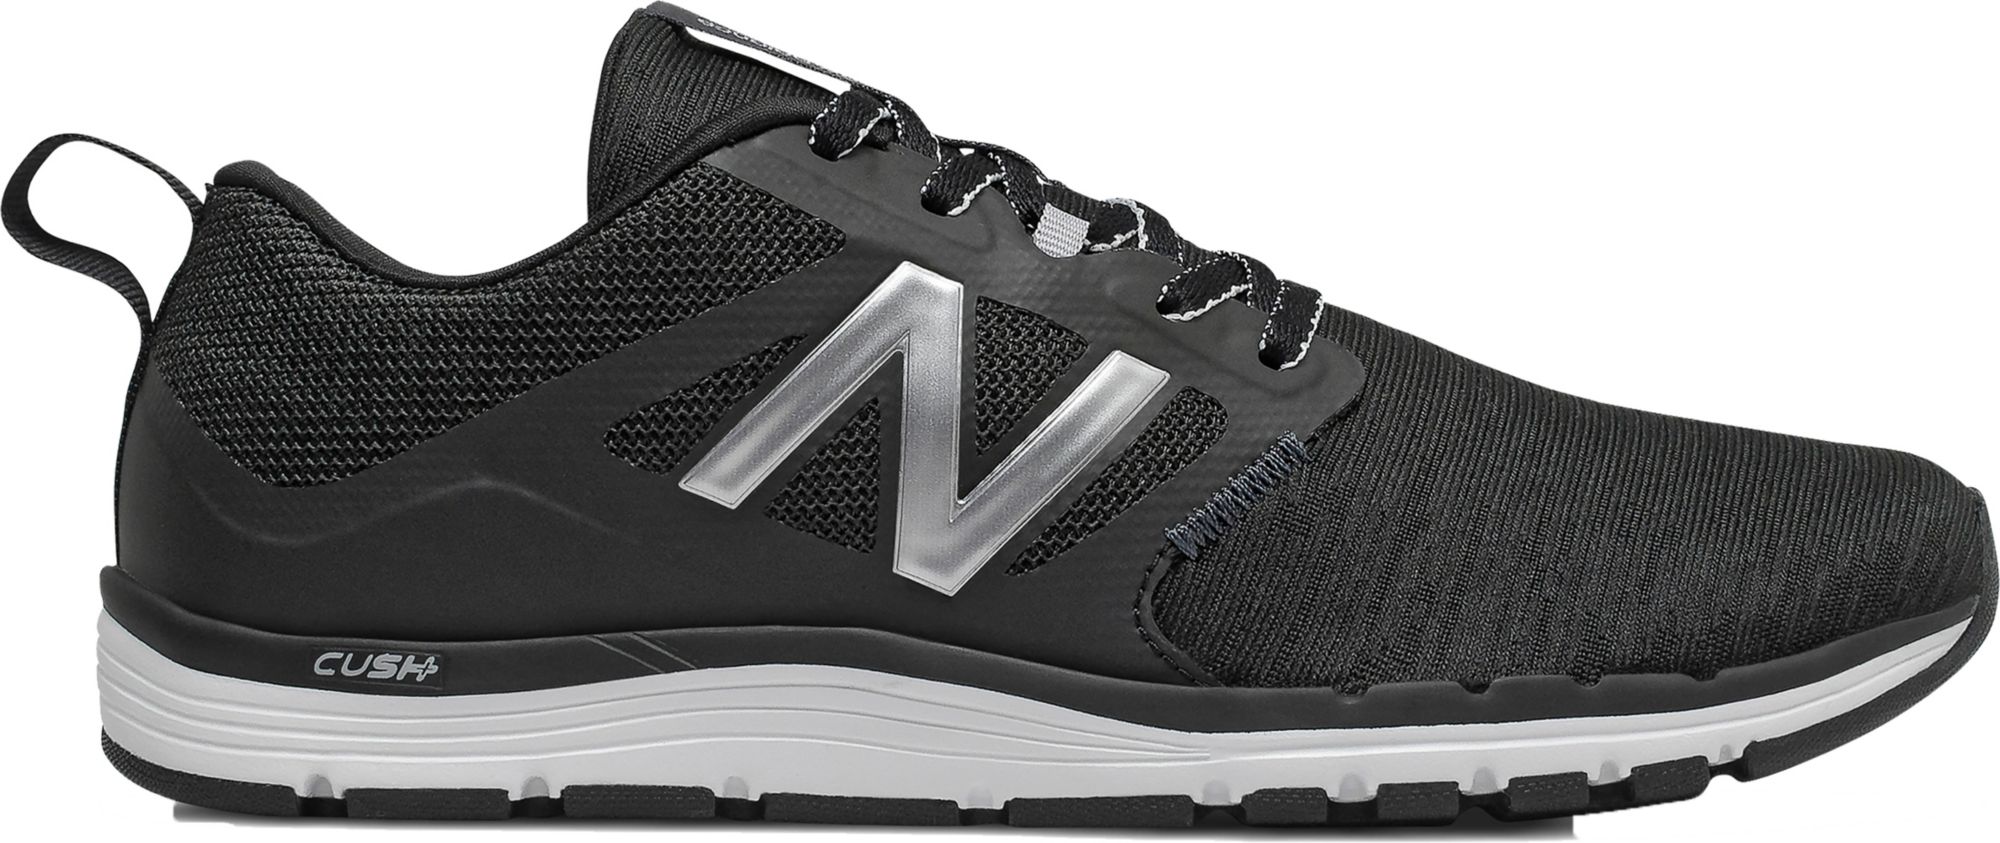 New Balance Shoes | Best Price Guarantee at DICK'S